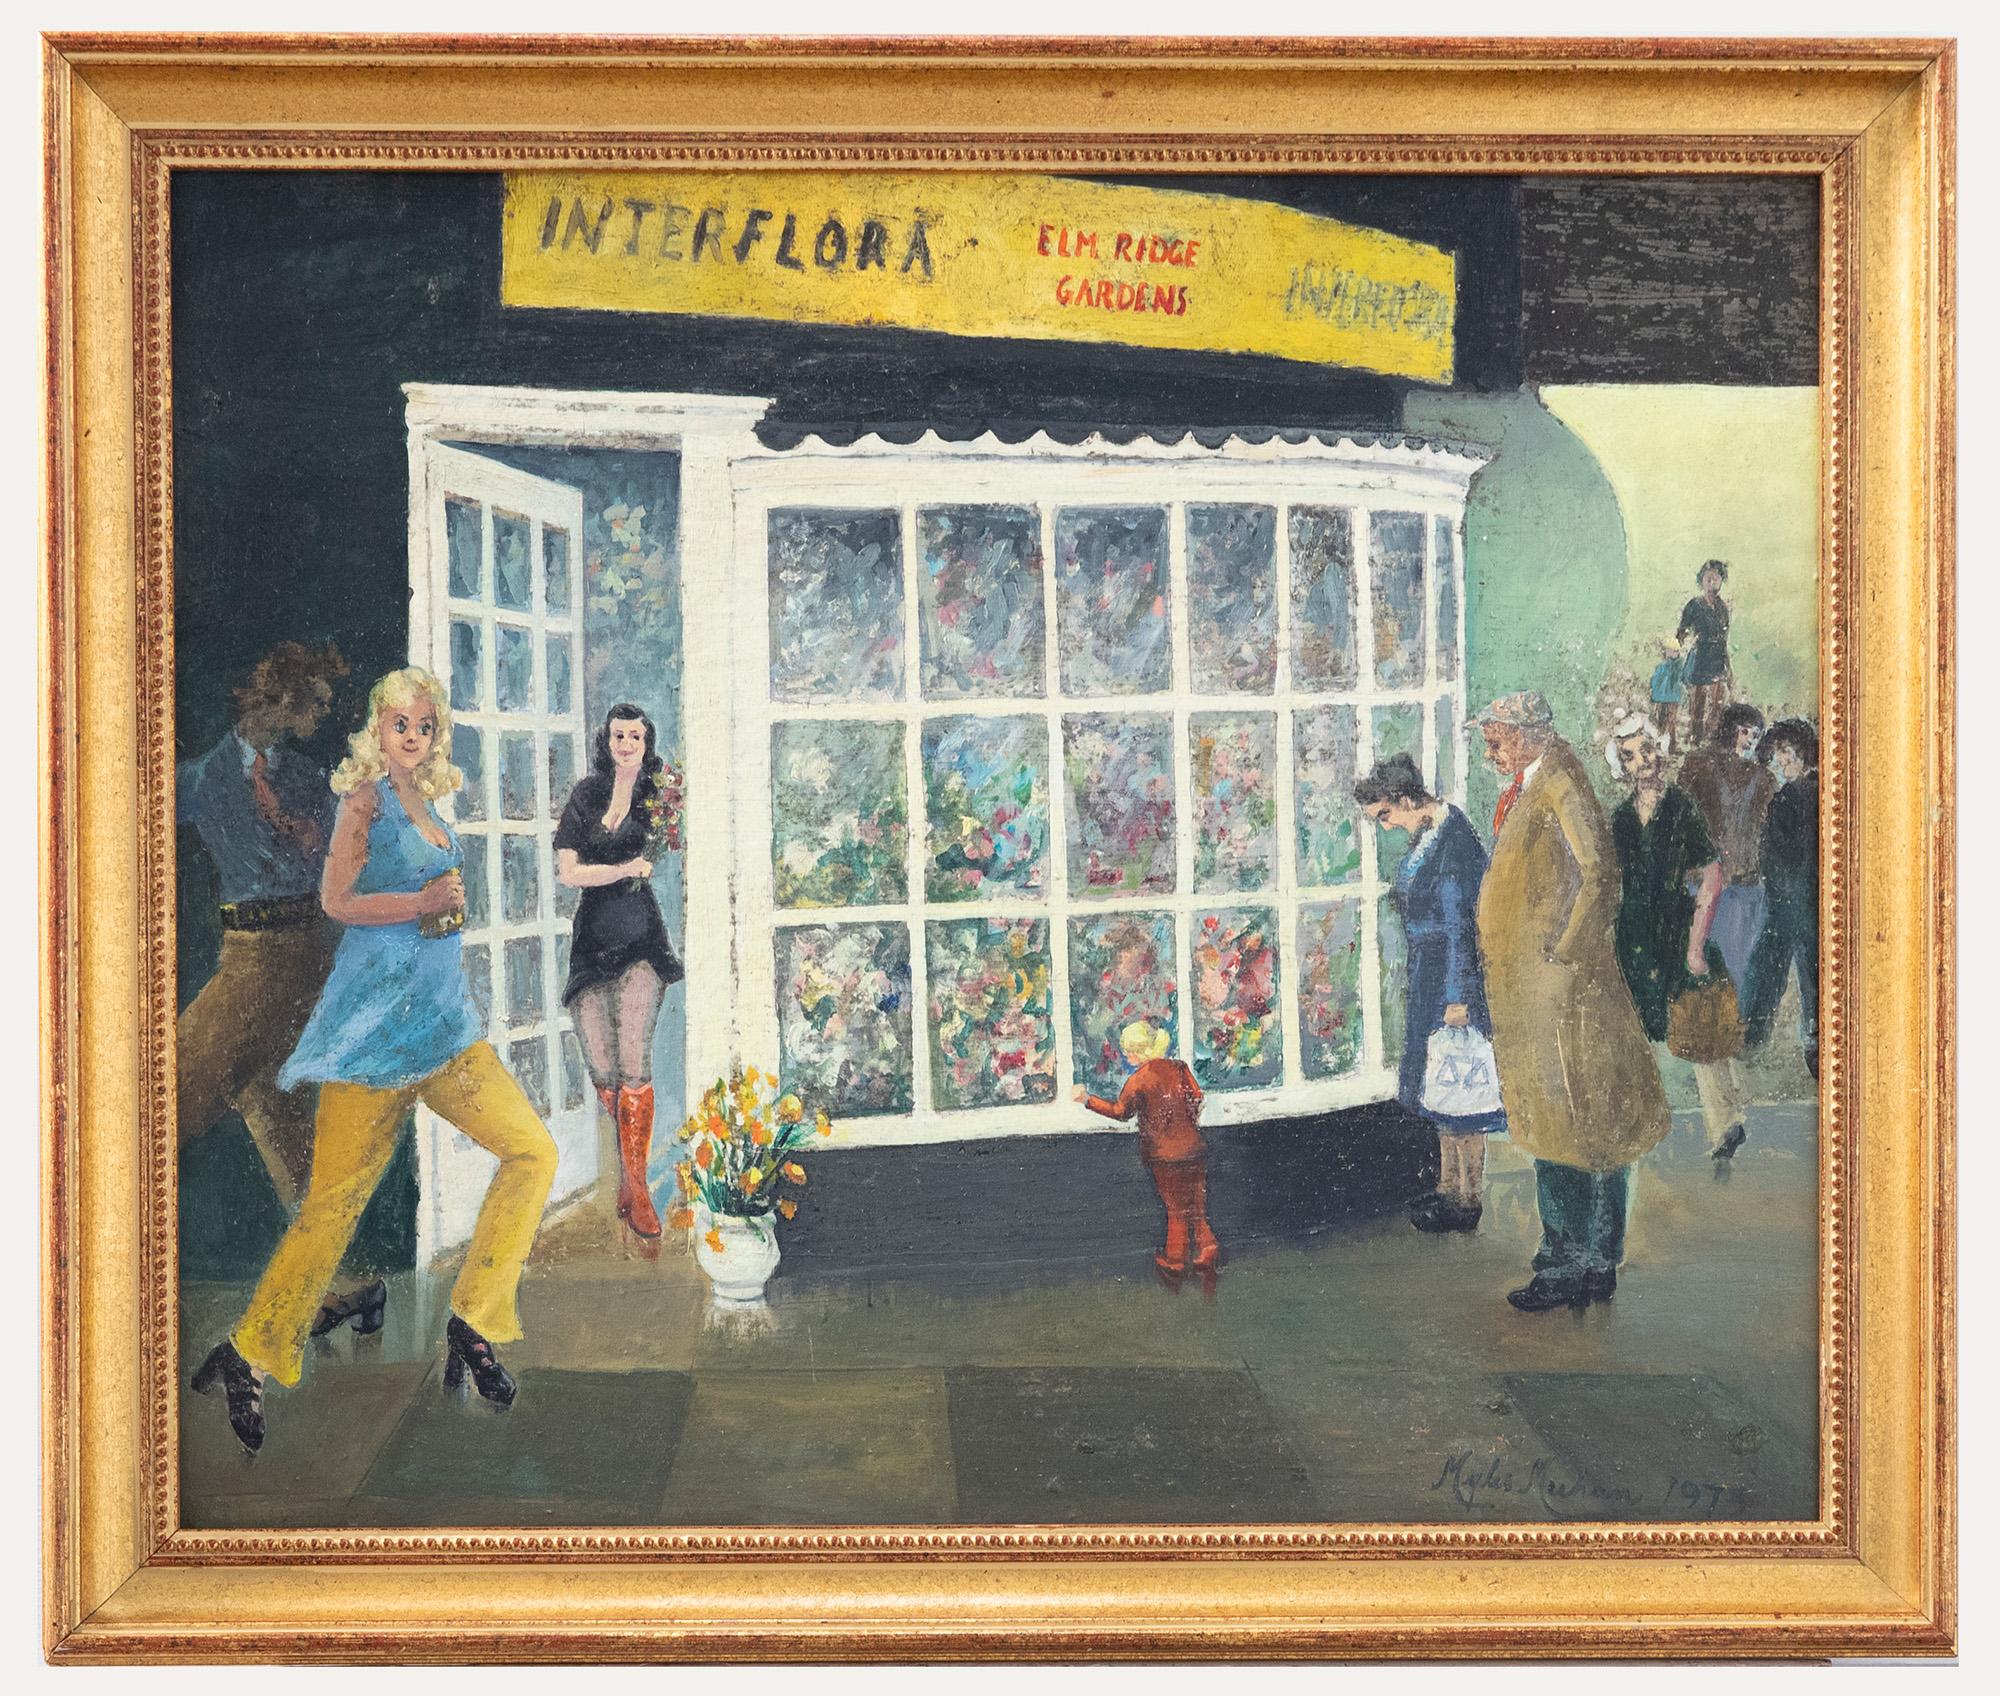 A snapshot in time- this social study depicts the flower shop in Elm Ridge Gardens with vibrant characters out shopping for the day. The painting has been well-presented in a contemporary gilt-effect frame. Signed by the artist to the lower right